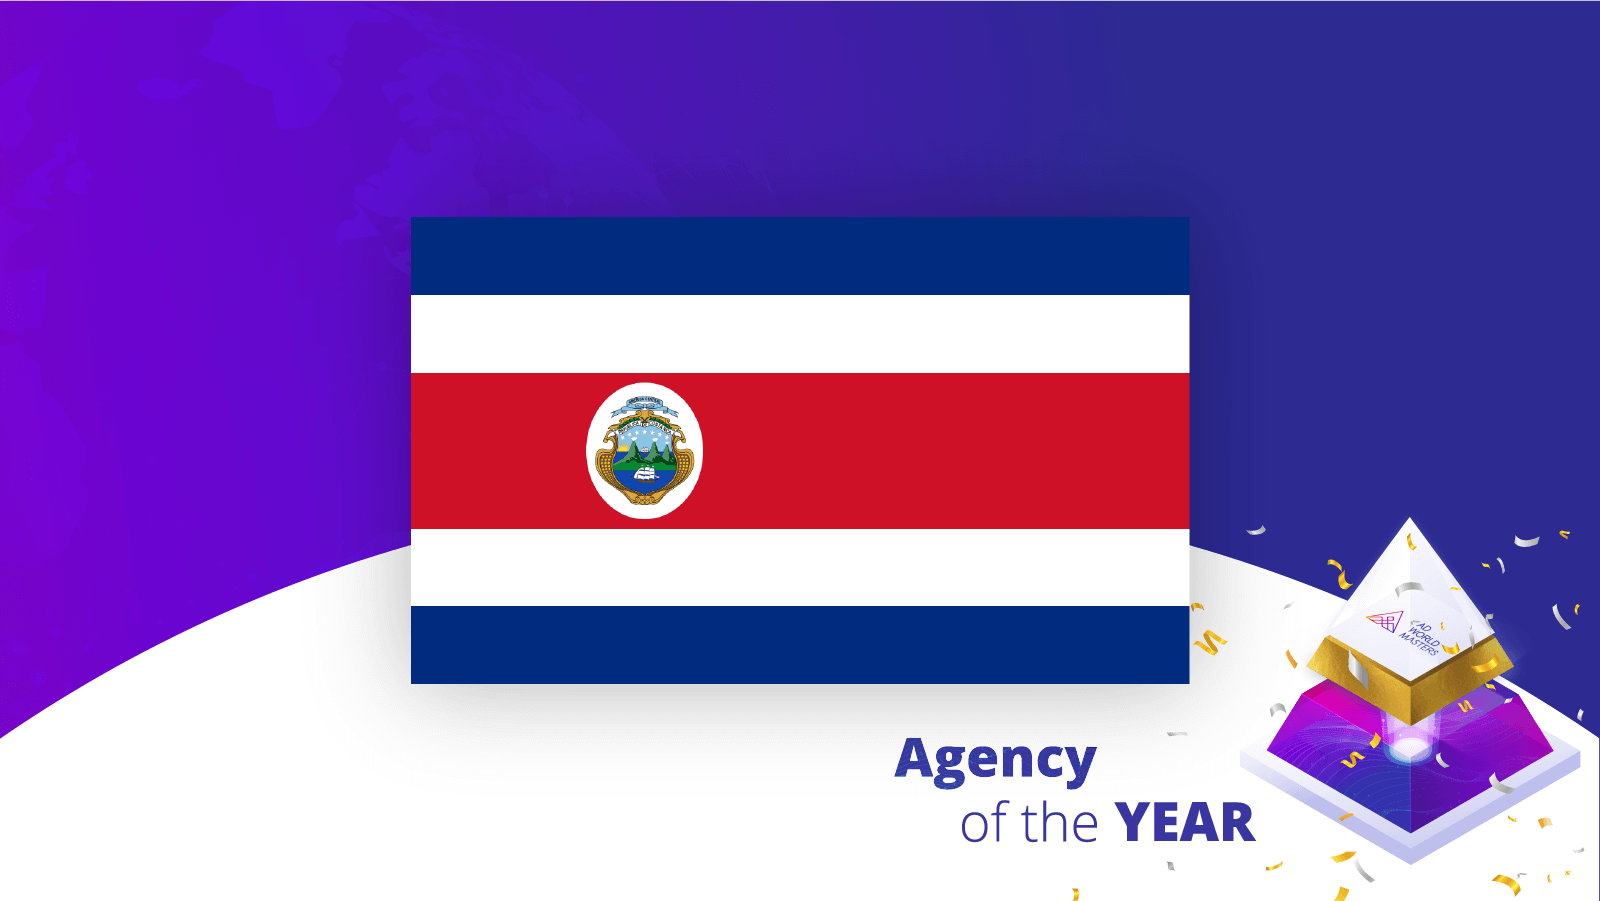 Agencies of the Year Costa Rica